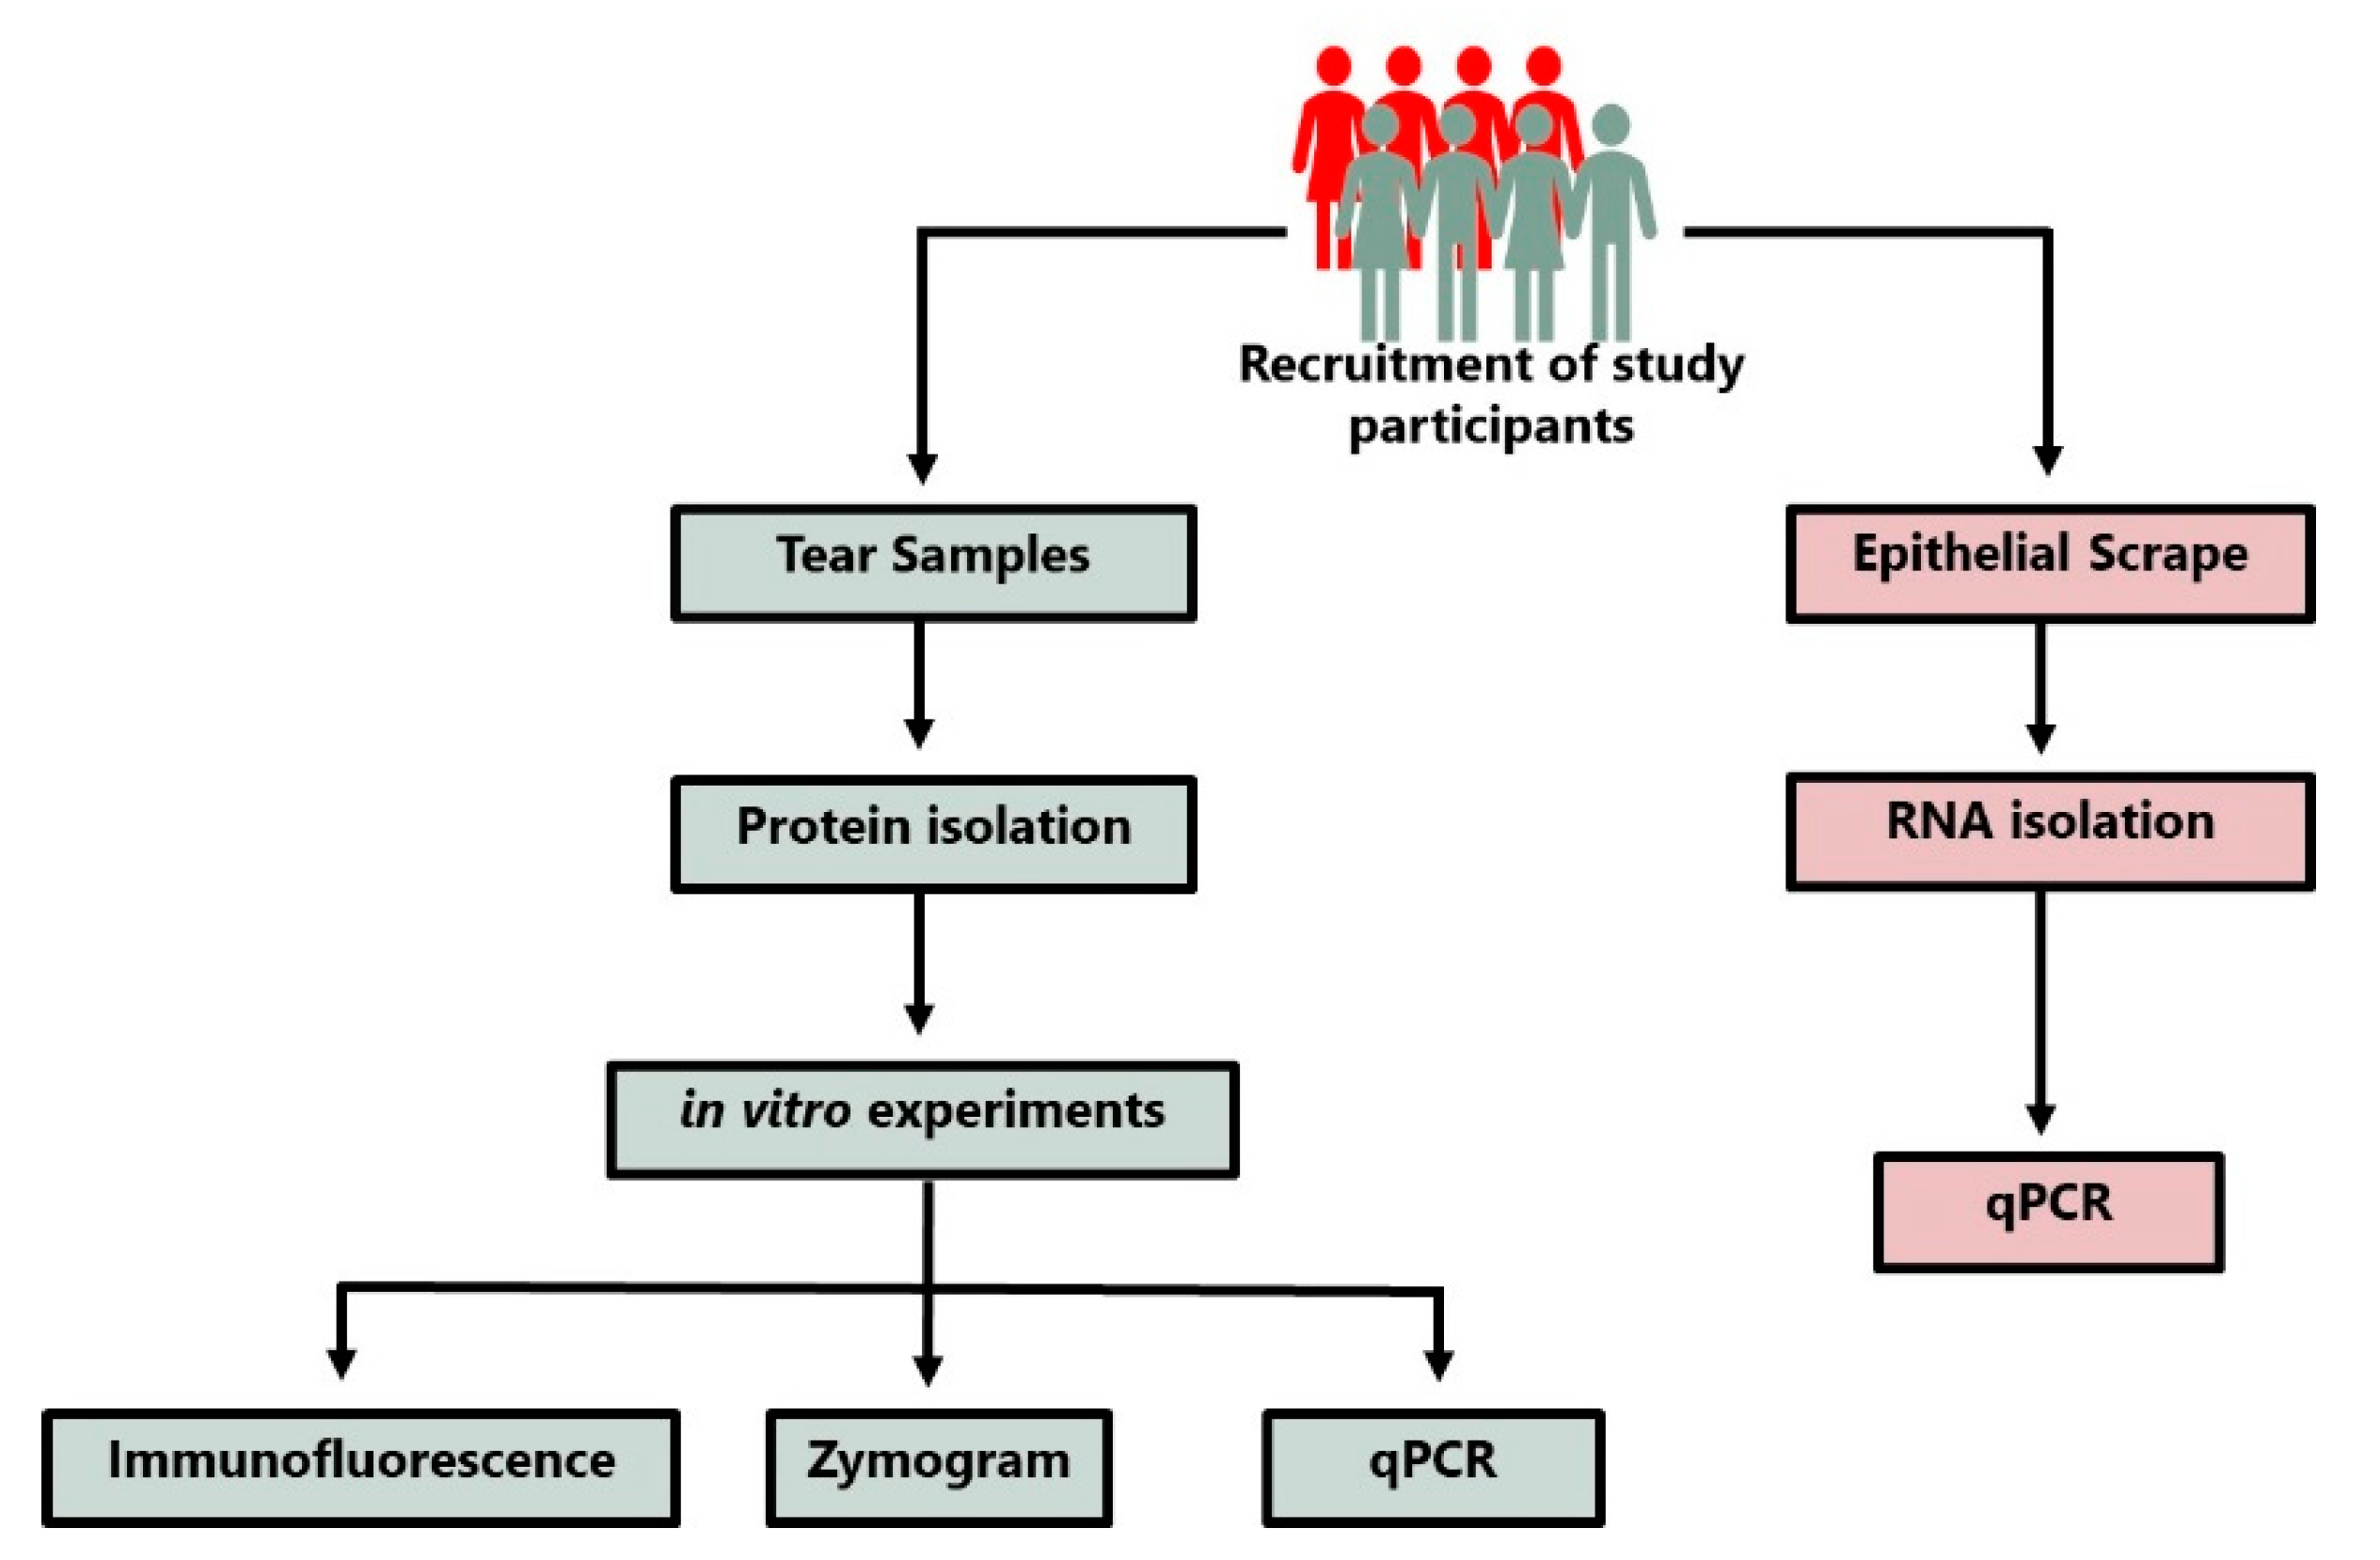 Flow diagram depicting the recruitment of participants and genetic test